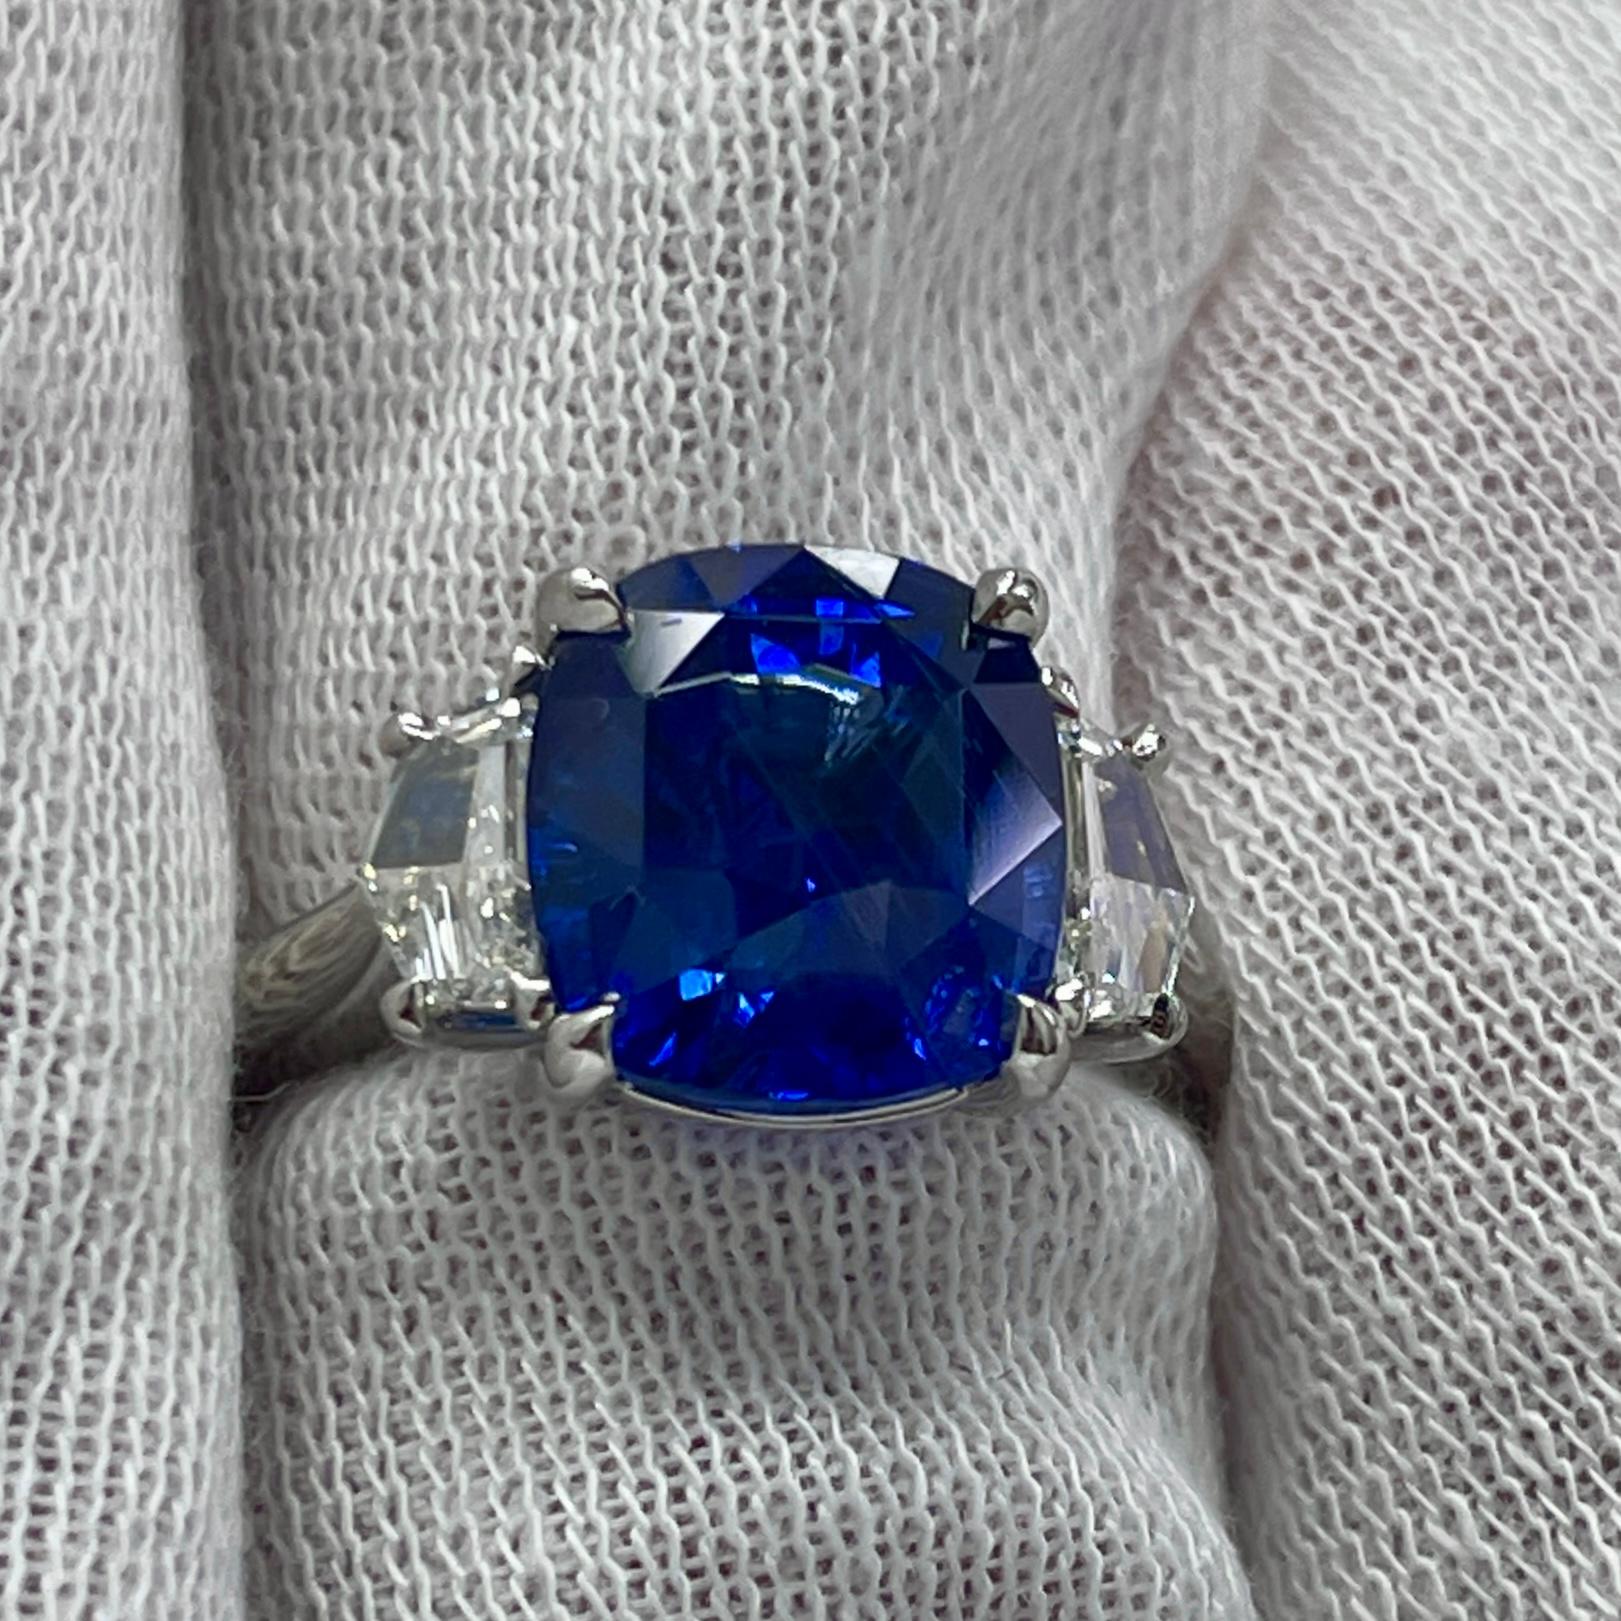 This is a LIVELY sapphire with a very deep color, mounted in an elegant 18K white gold and diamond ring with 0.38Ct of brilliant white diamonds. Suitable for any occasion!